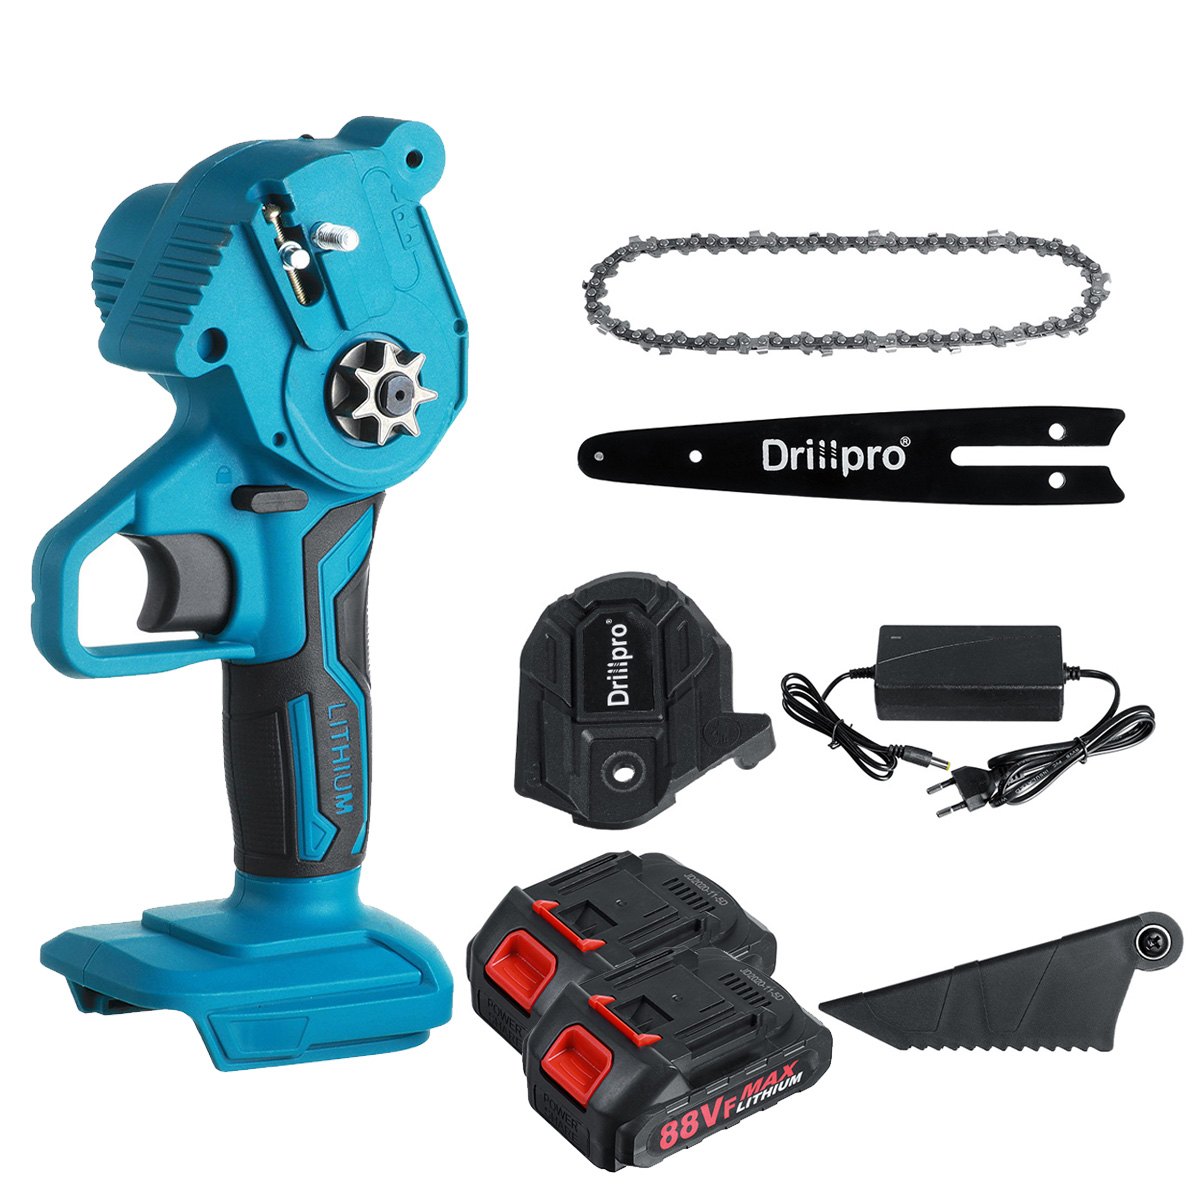 Drillpro-6-Inch-Electric-Chain-Saw-Portable-Woodworking-Tool-Wood-Cutter-W-1-or-2pcs-Battery-For-Mak-1830156-13